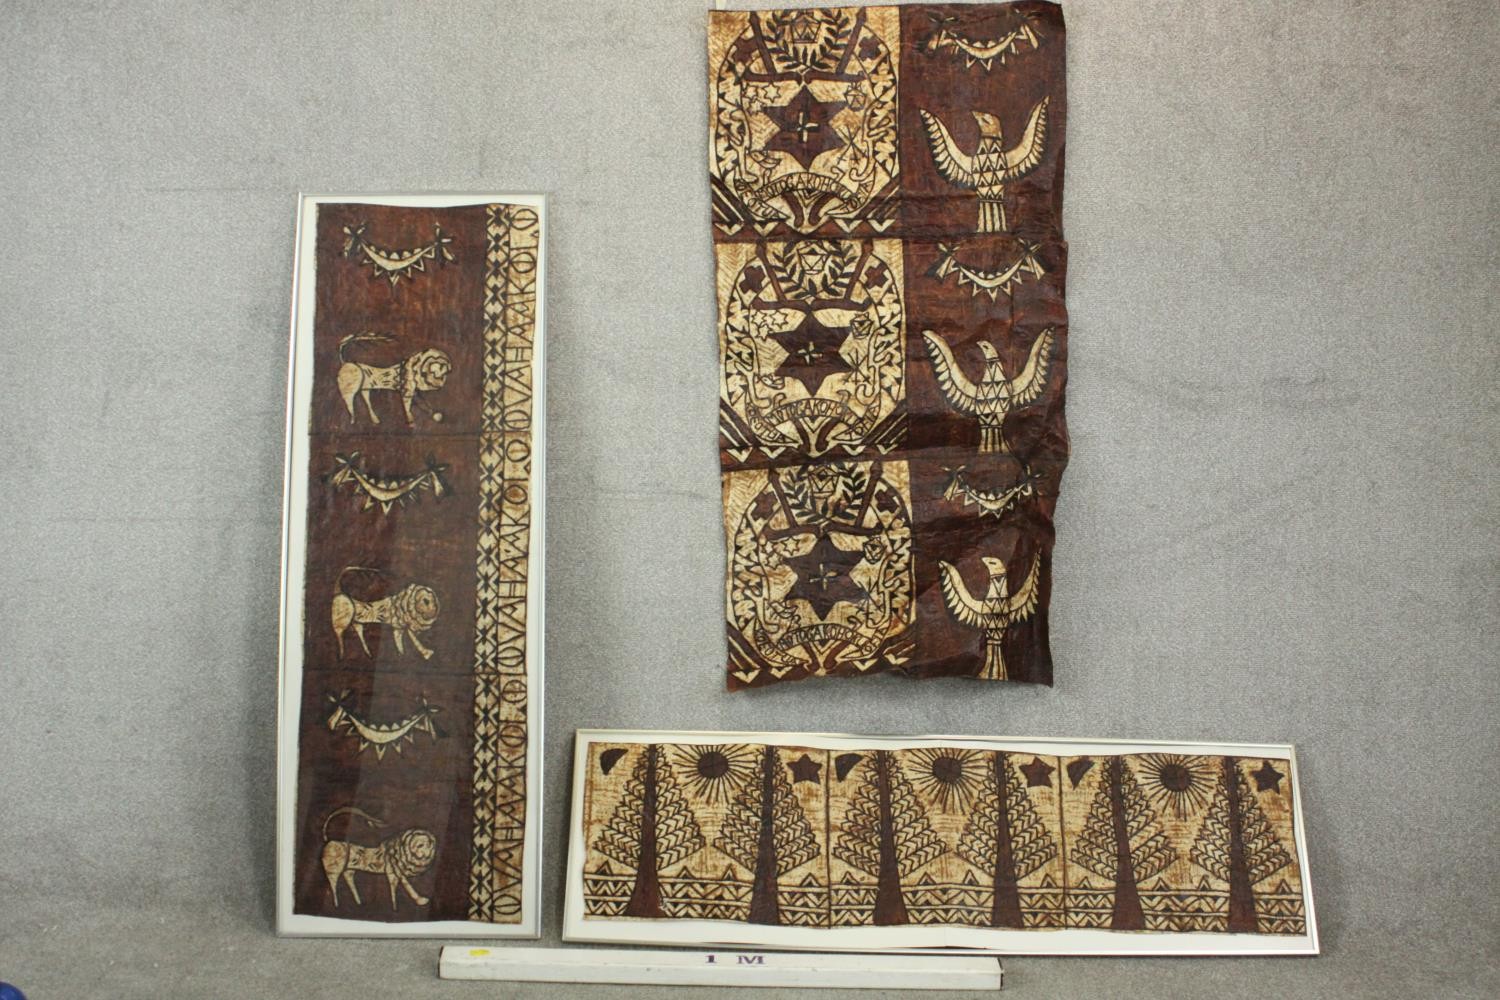 Two large Tonganese Tapa cloth wall hangings, one depicting animals and one depicting stylised trees - Image 2 of 10